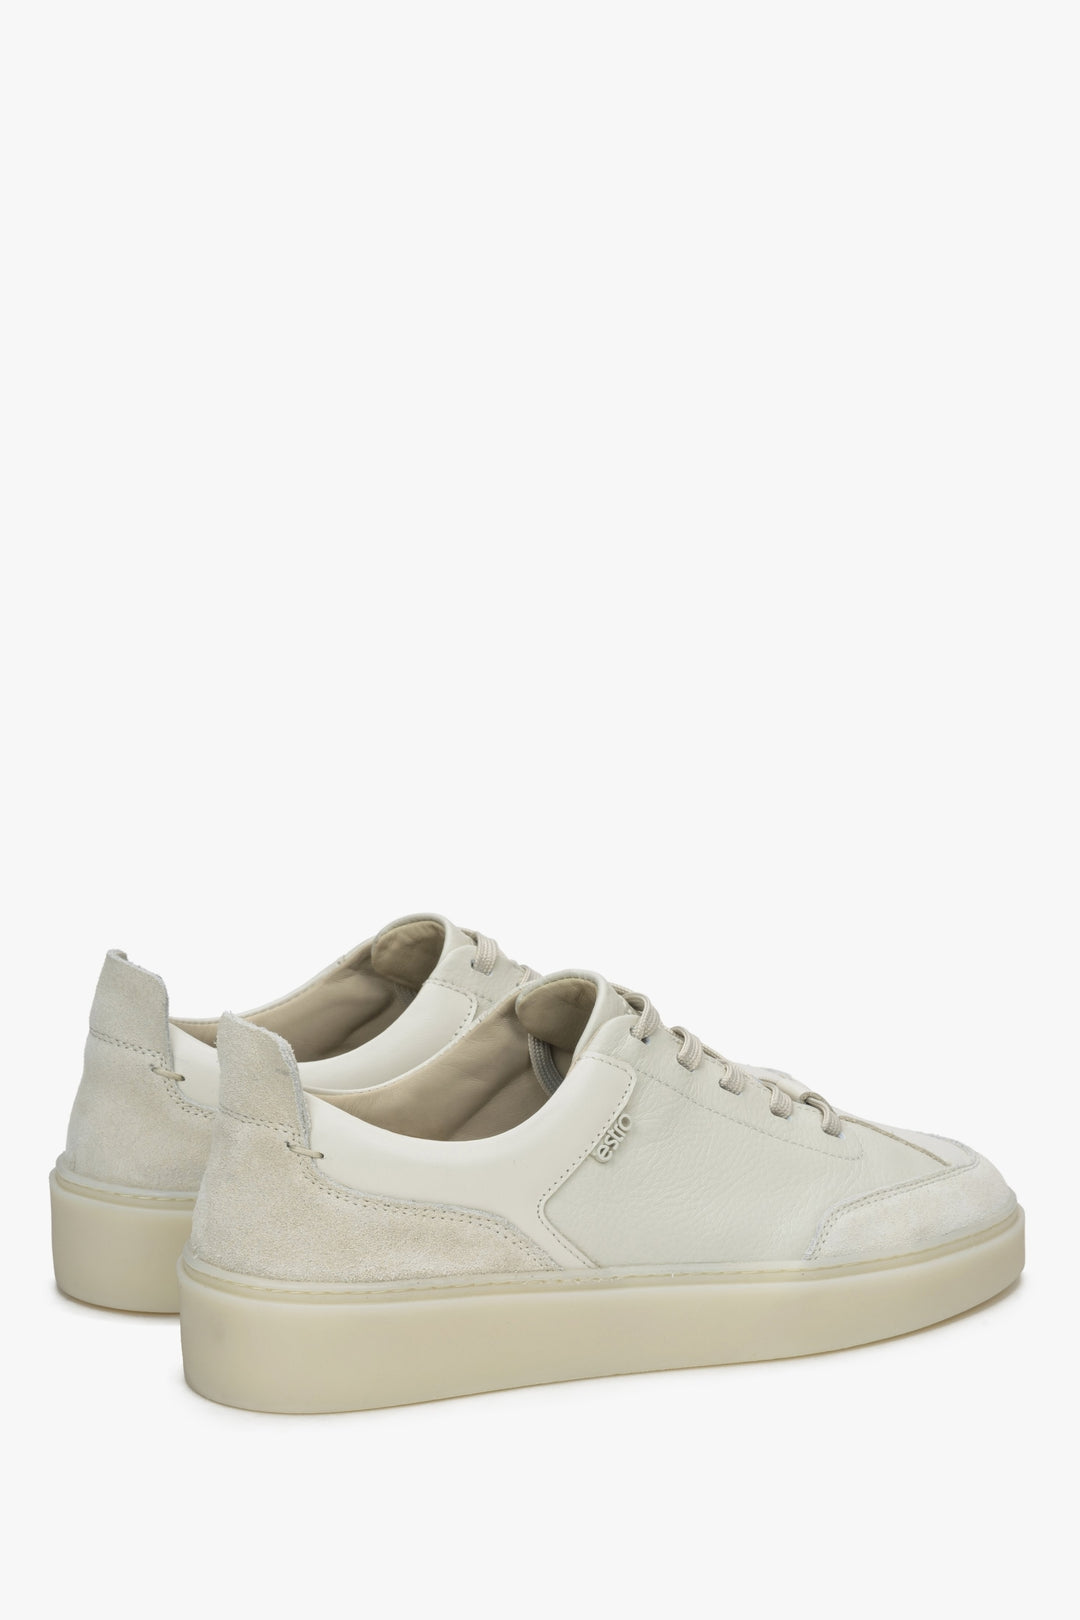 Estro women's beige leather-velour sneakers - close-up on the heel counter and side profile.